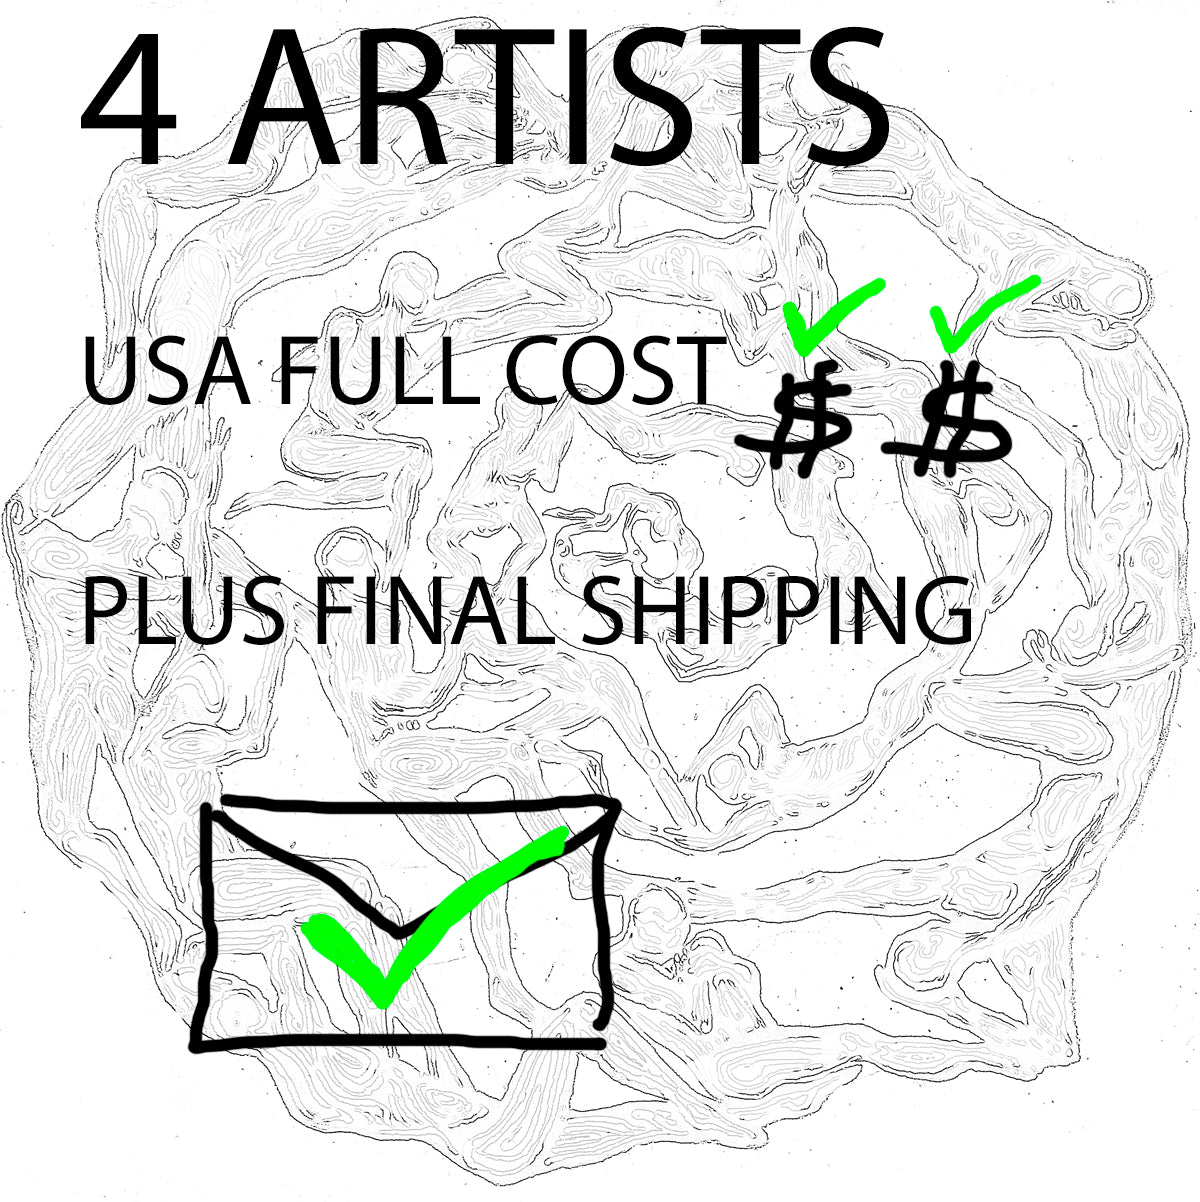 4-ARTISTS TEAM FULL Participation Including Final Shipping to USA $293